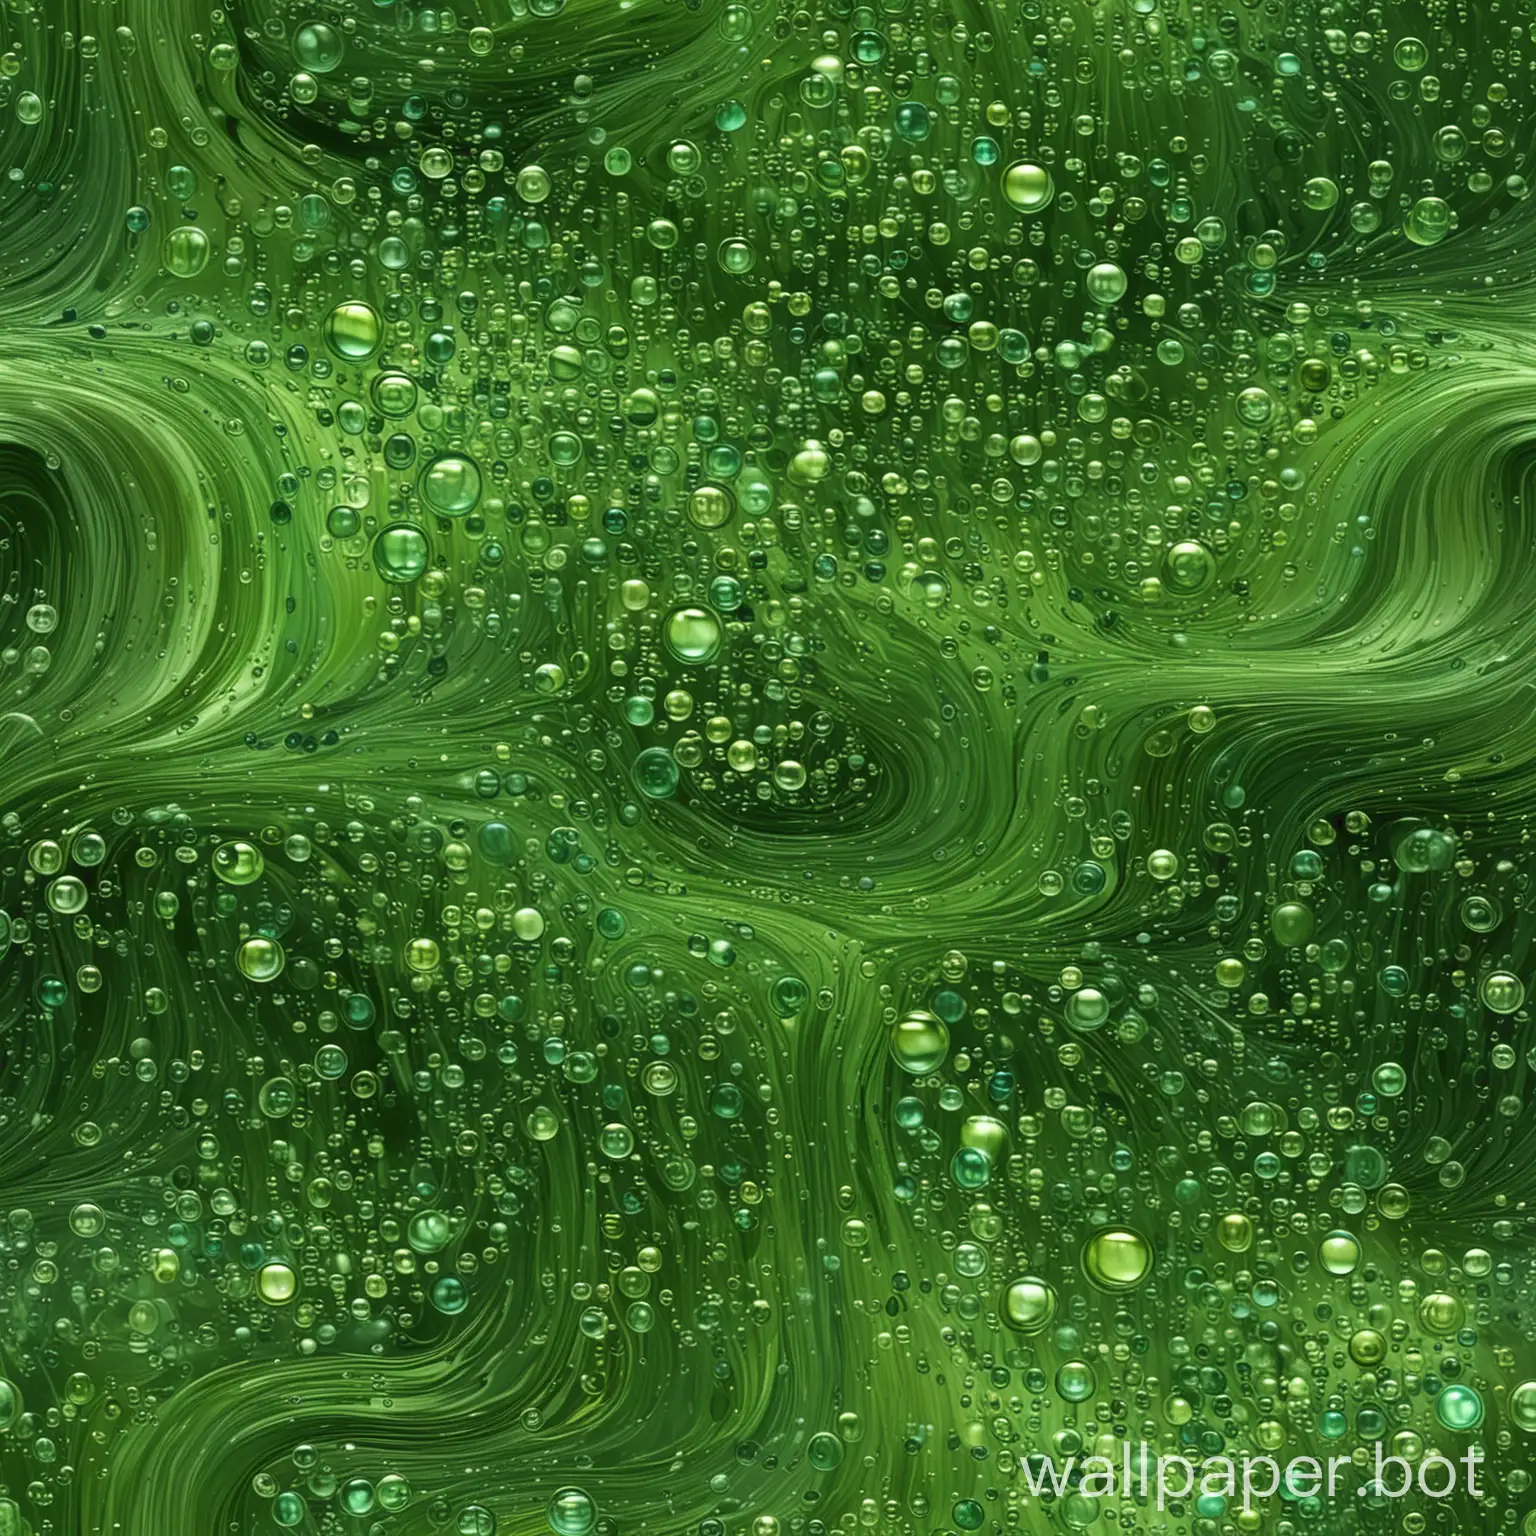 Dynamic-Green-Fluidity-Wallpaper-Swirling-Waves-of-Calming-Motion